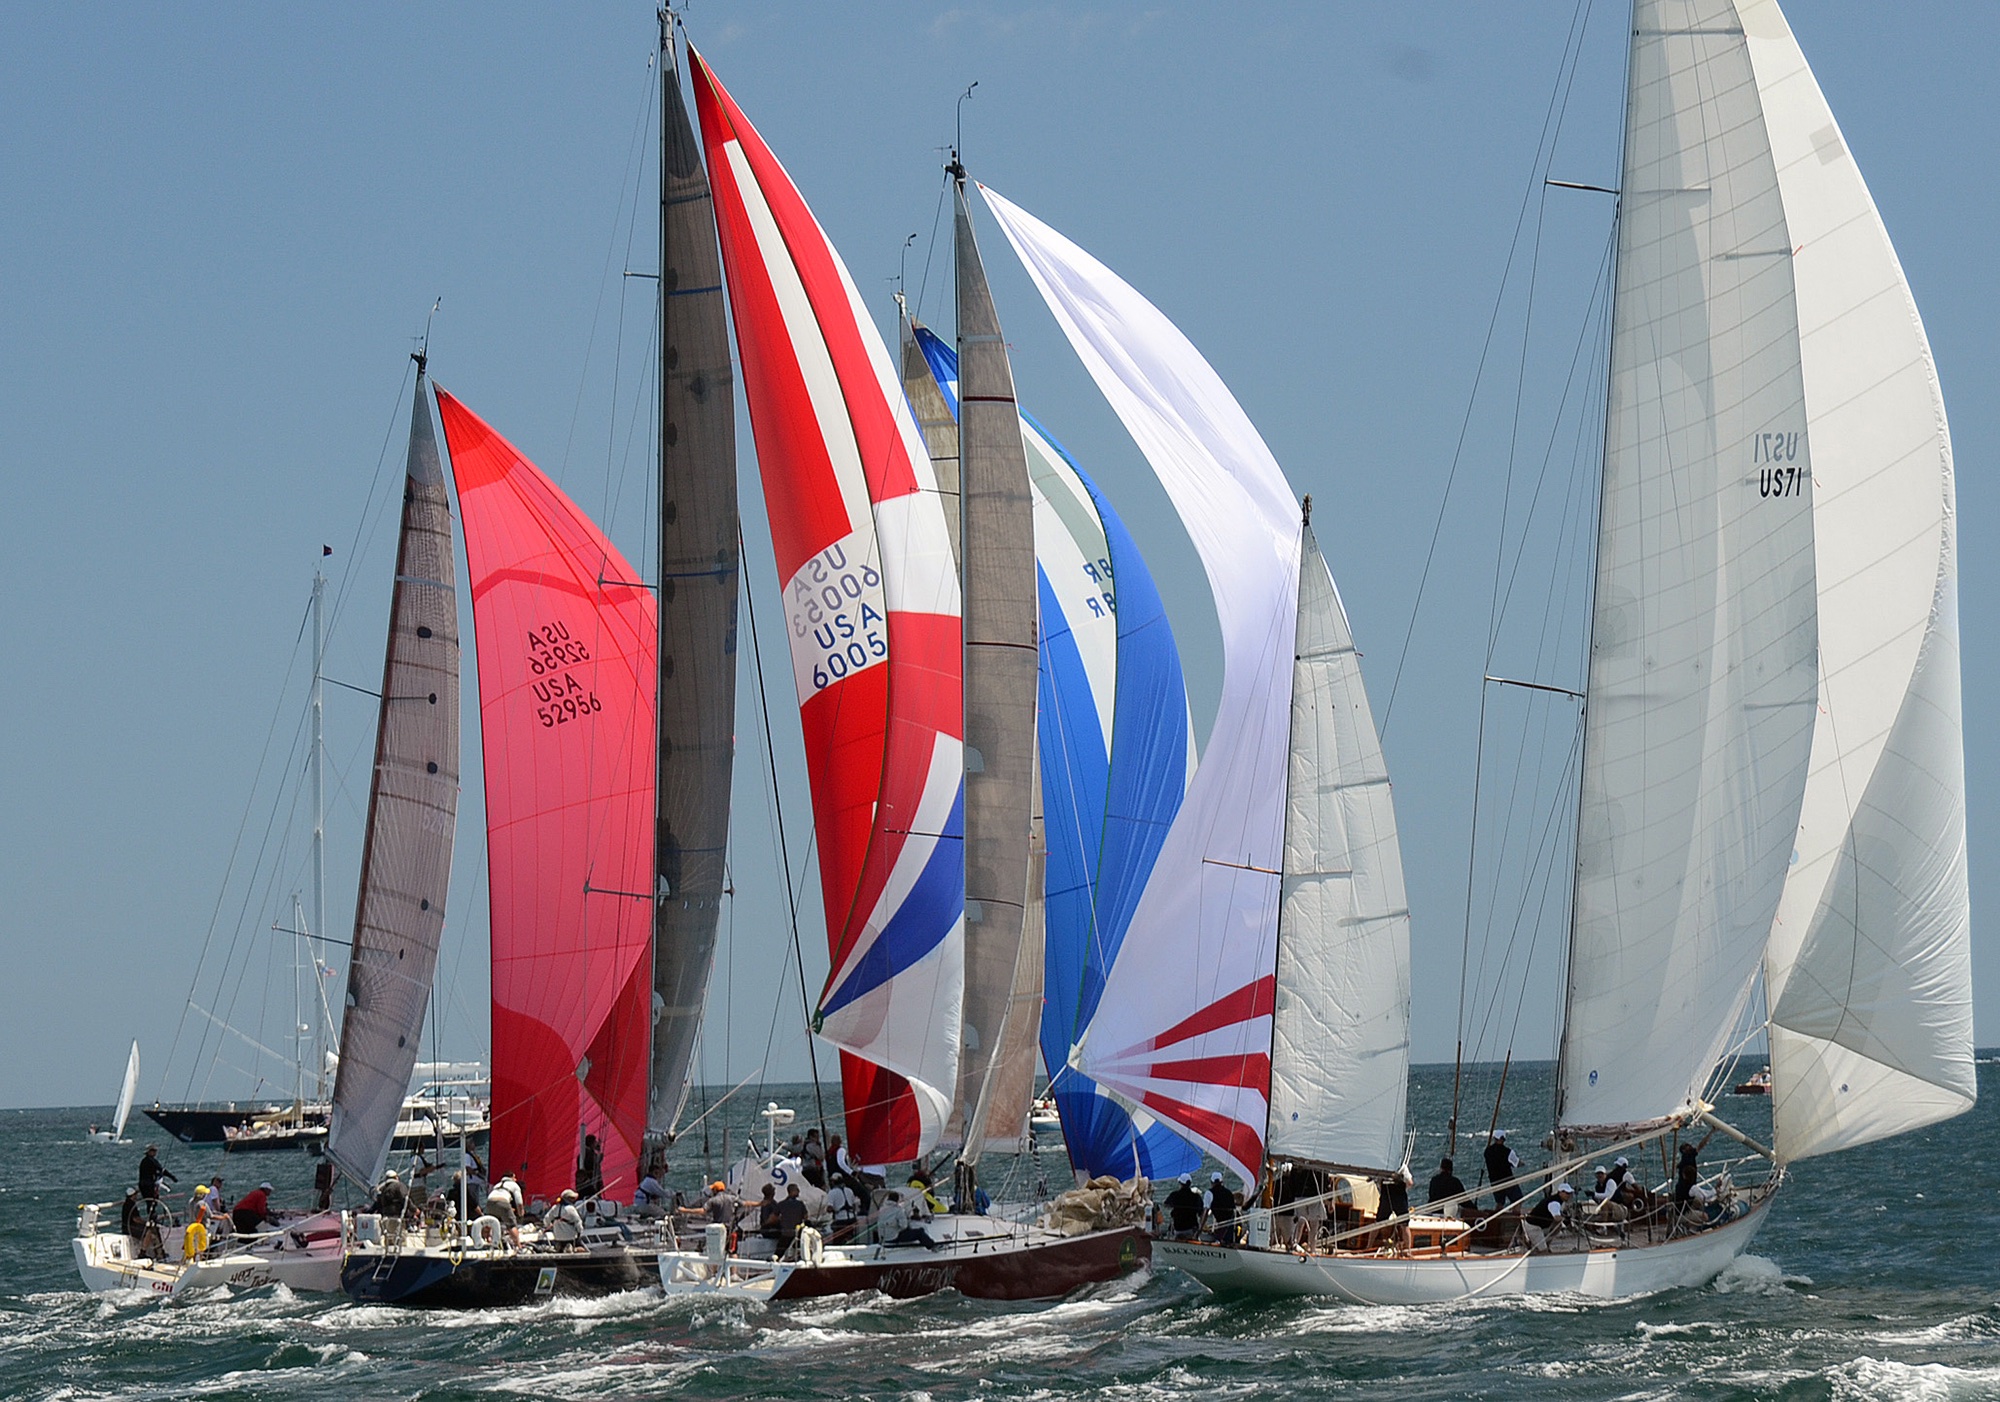 In a northerly breeze, the fleet starts under colorful spinnakers as it did in 2012 with modern boats lined up next to the white sails of Black Watch, which celebrates its 80th season with the 2108 race (Talbot Wilson photo)